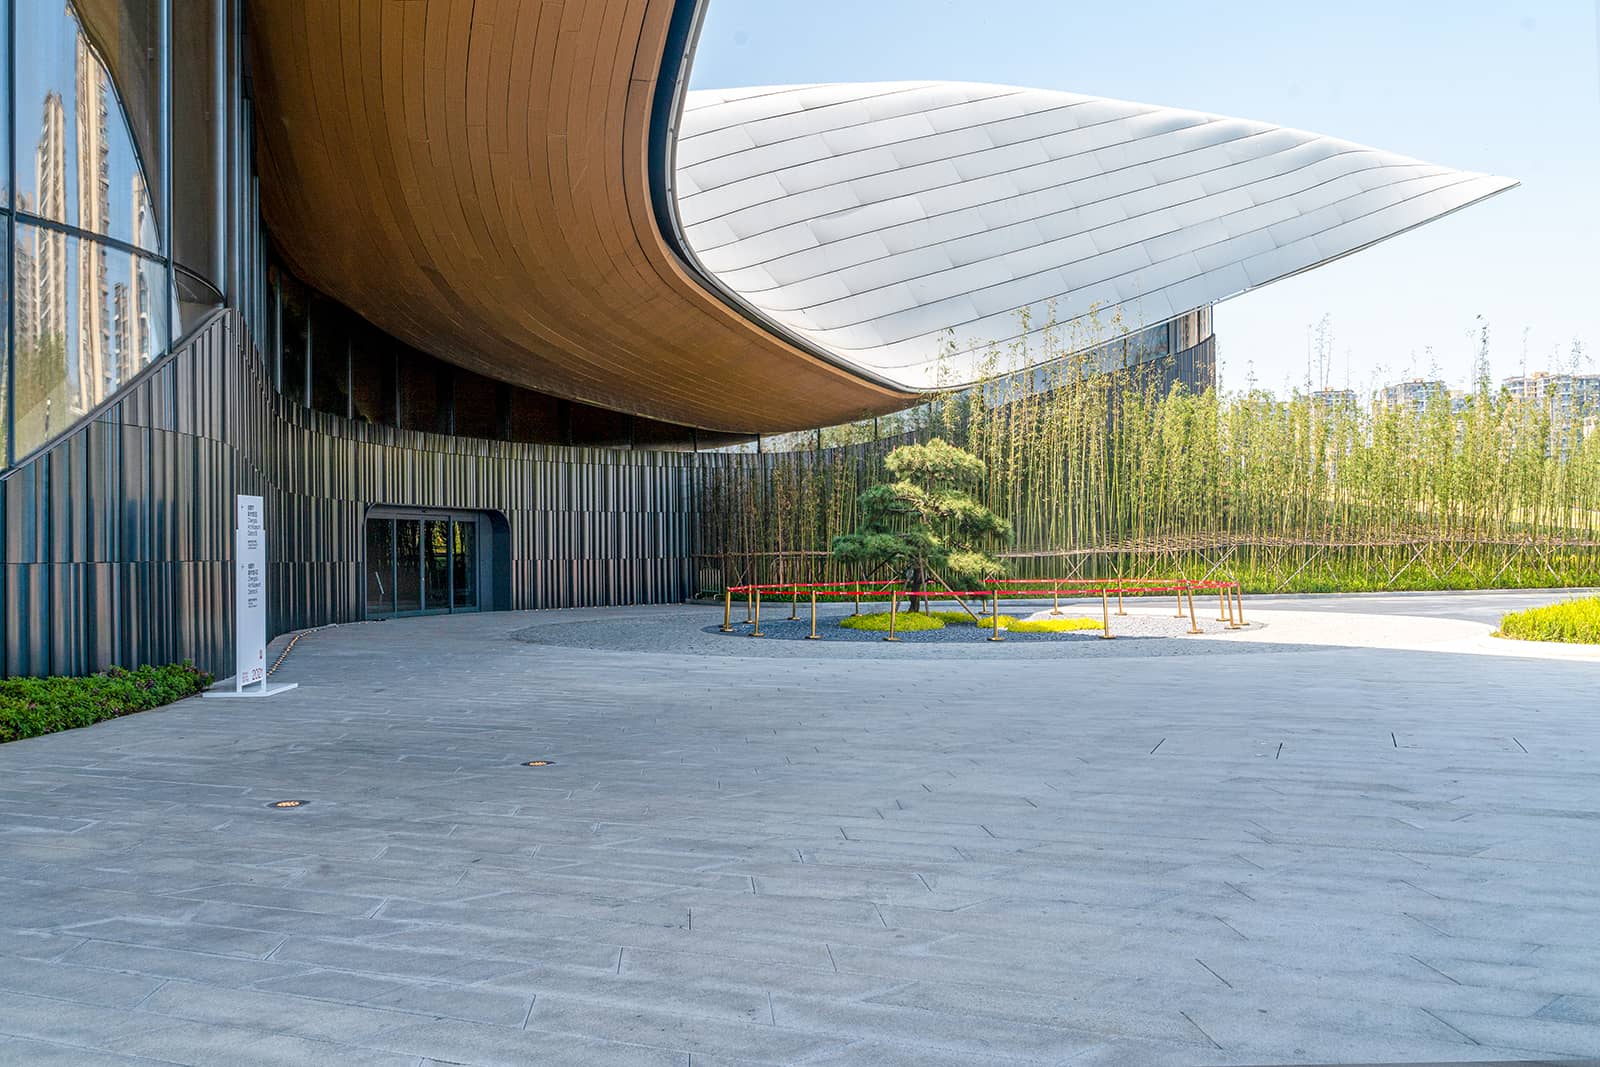 The wall of Tianfu Art Museum clad in LOPO curved, textured terracotta panels.jpg